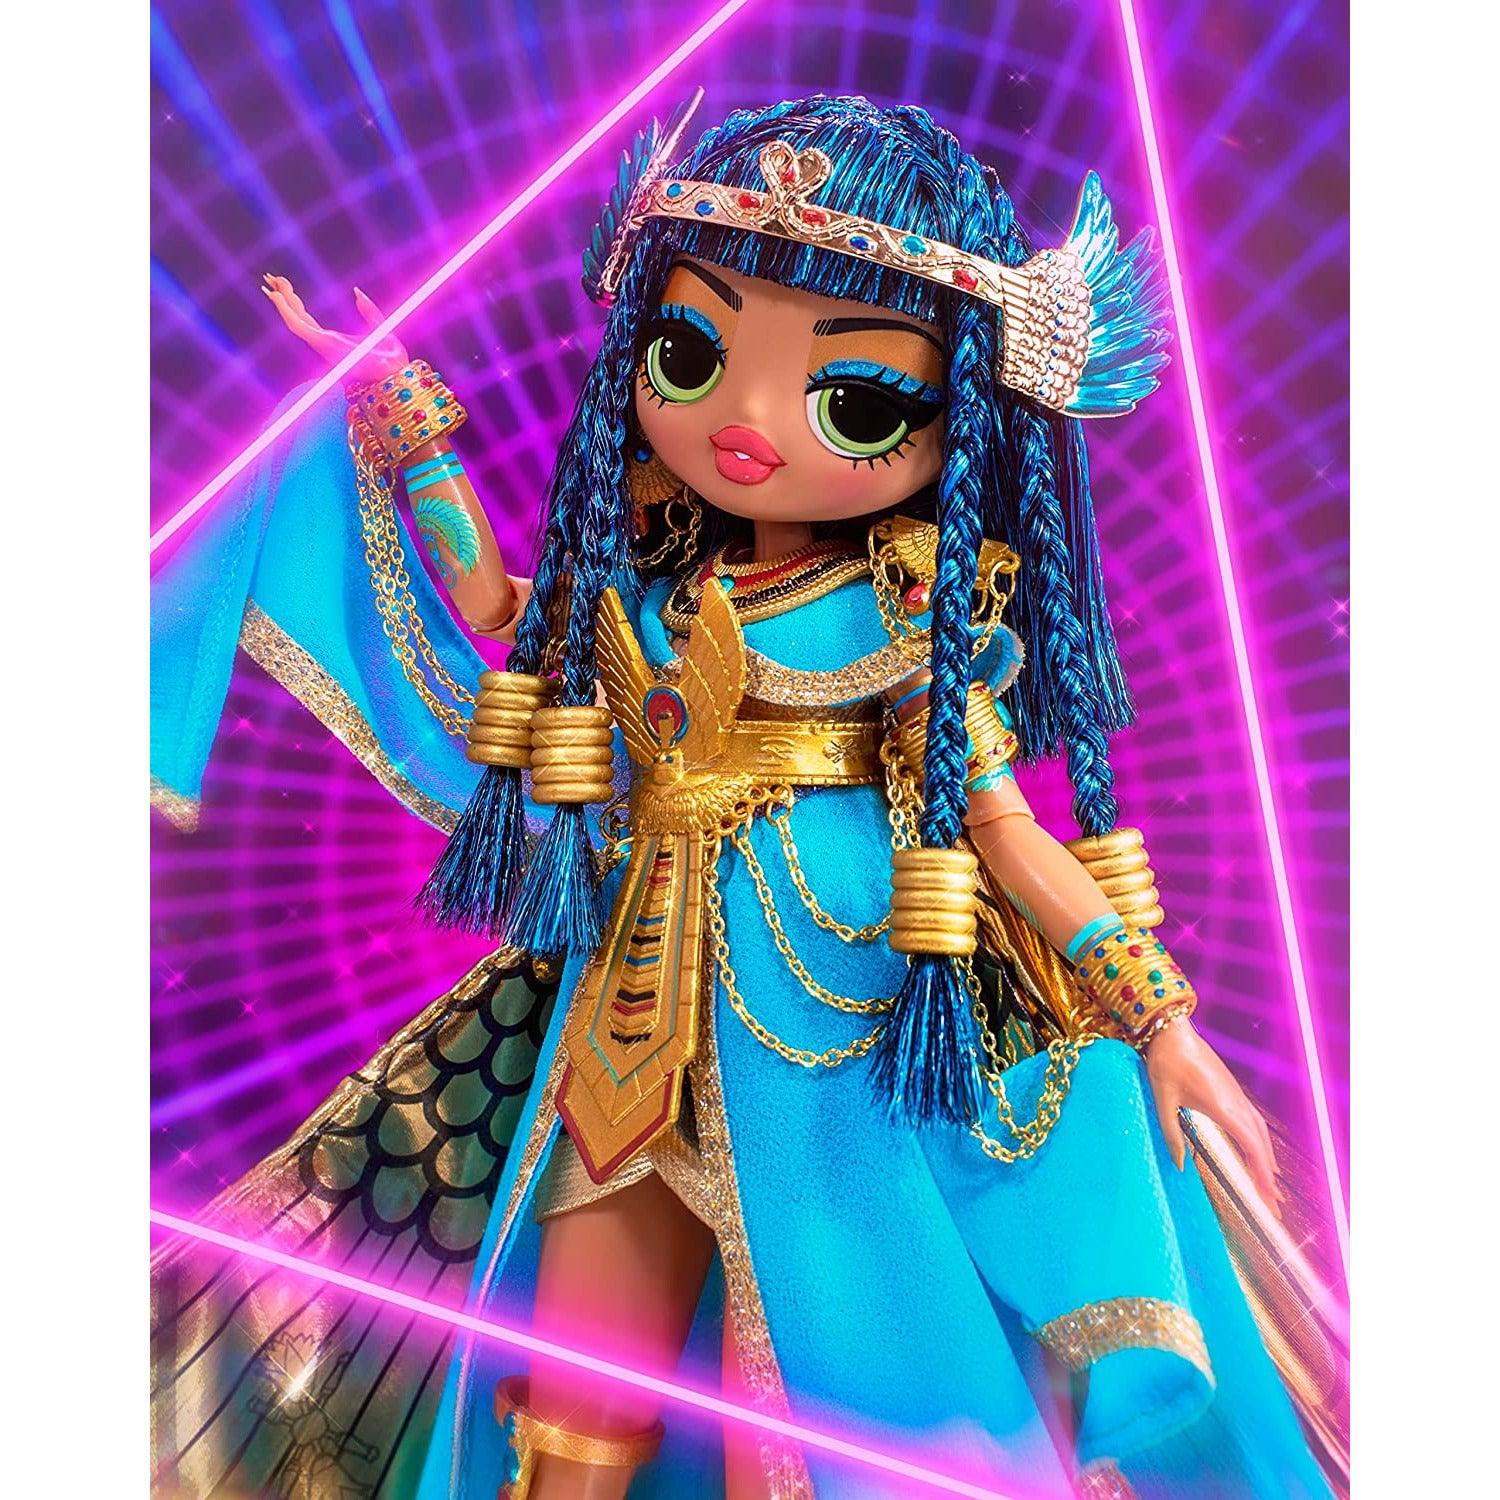 LOL Surprise OMG Fierce Collector Cleopatra Fashion Doll- Premium Collector Doll with Luxe Blue & Gold Royal Outfit Accessories - BumbleToys - 5-7 Years, Dolls, Girls, L.O.L, Miniature Dolls & Accessories, OXE, Pre-Order